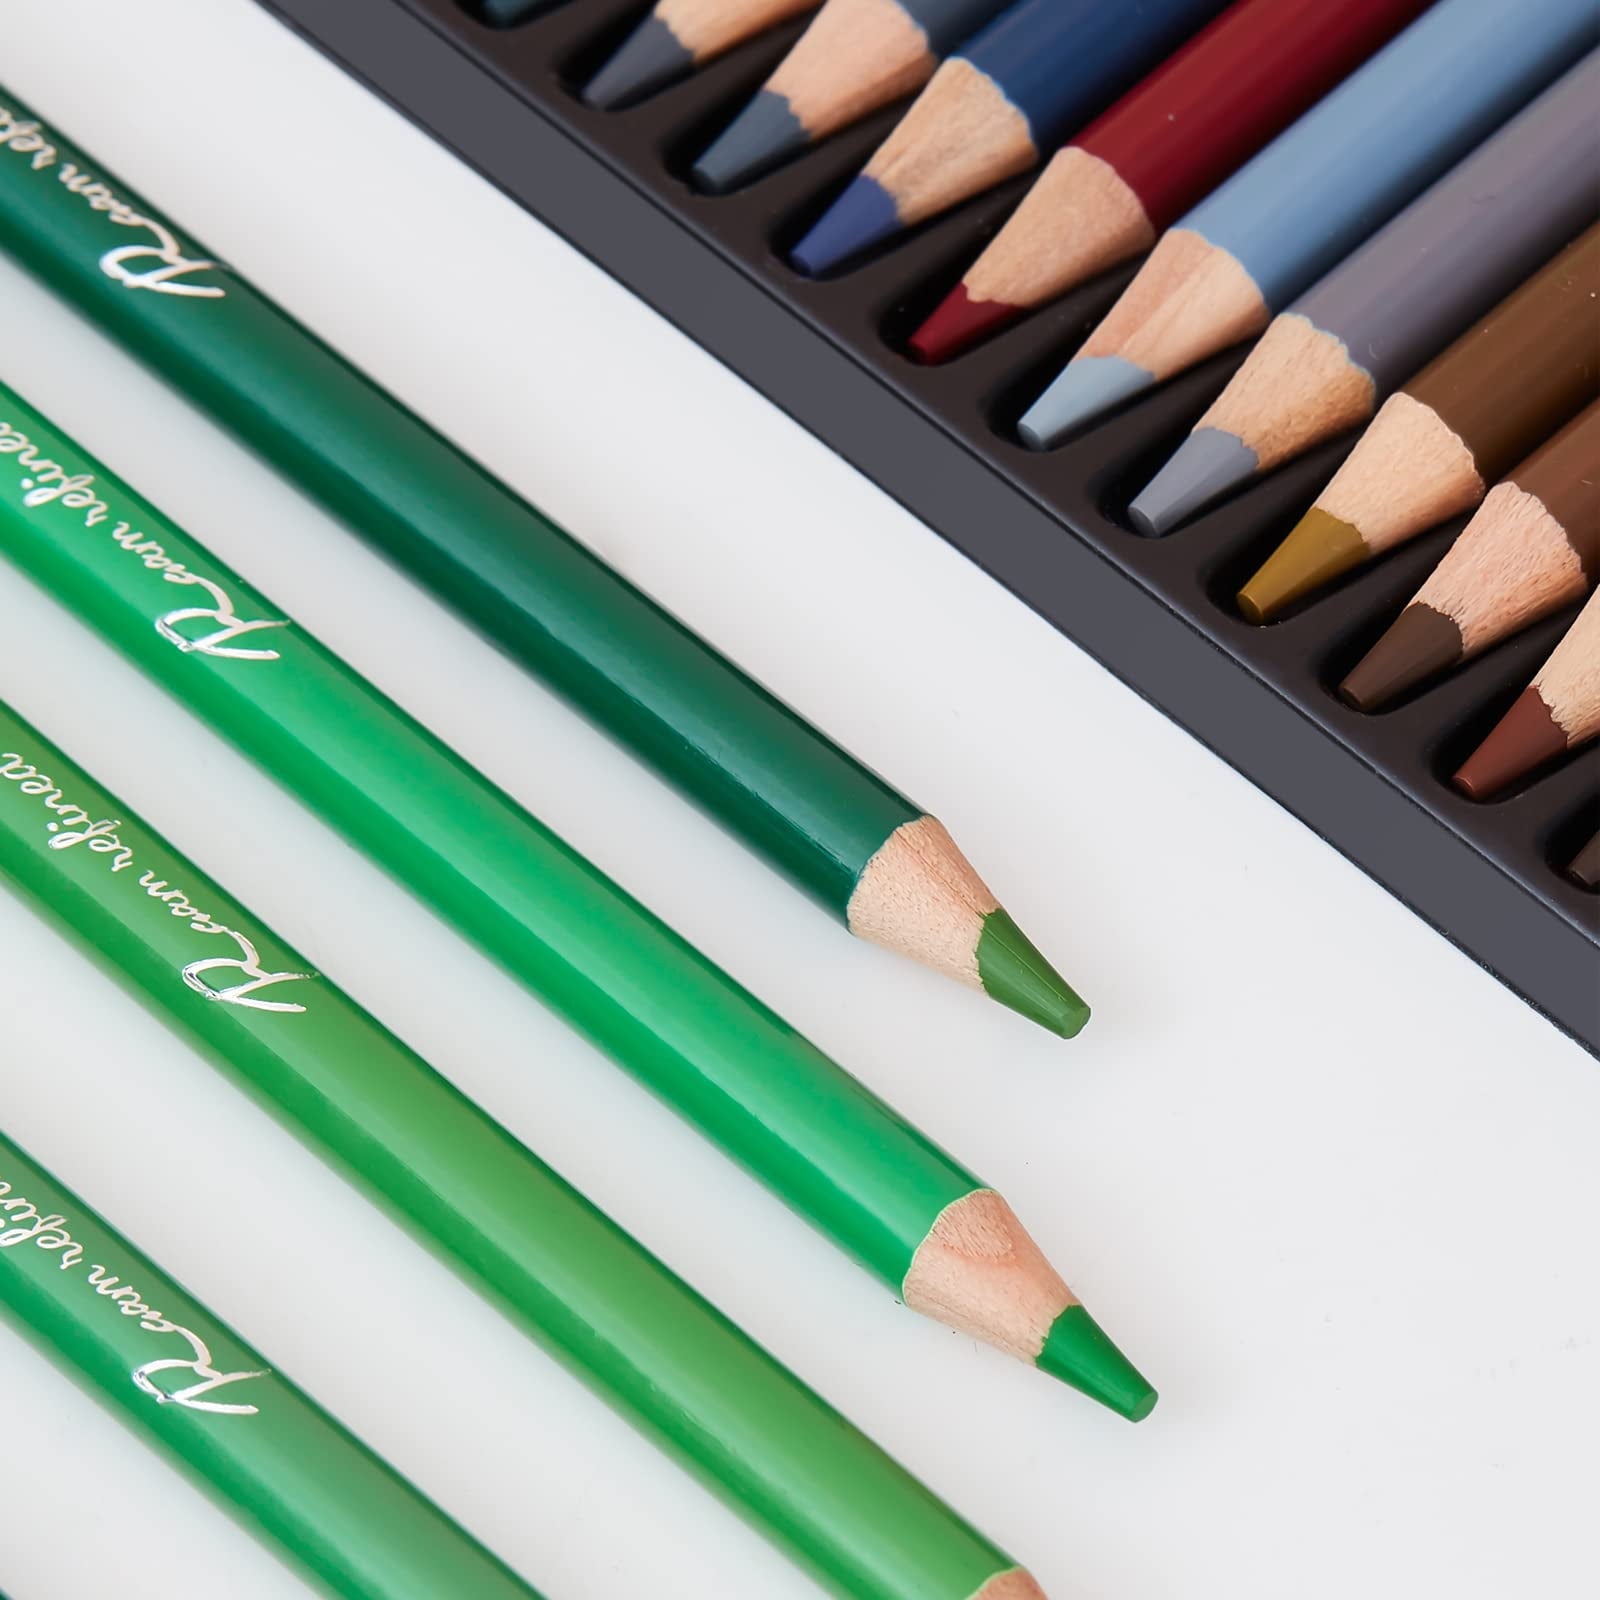 RAAM REFINED Premier Colored Pencils 180 Count Only $33.99 (Reg. $70)